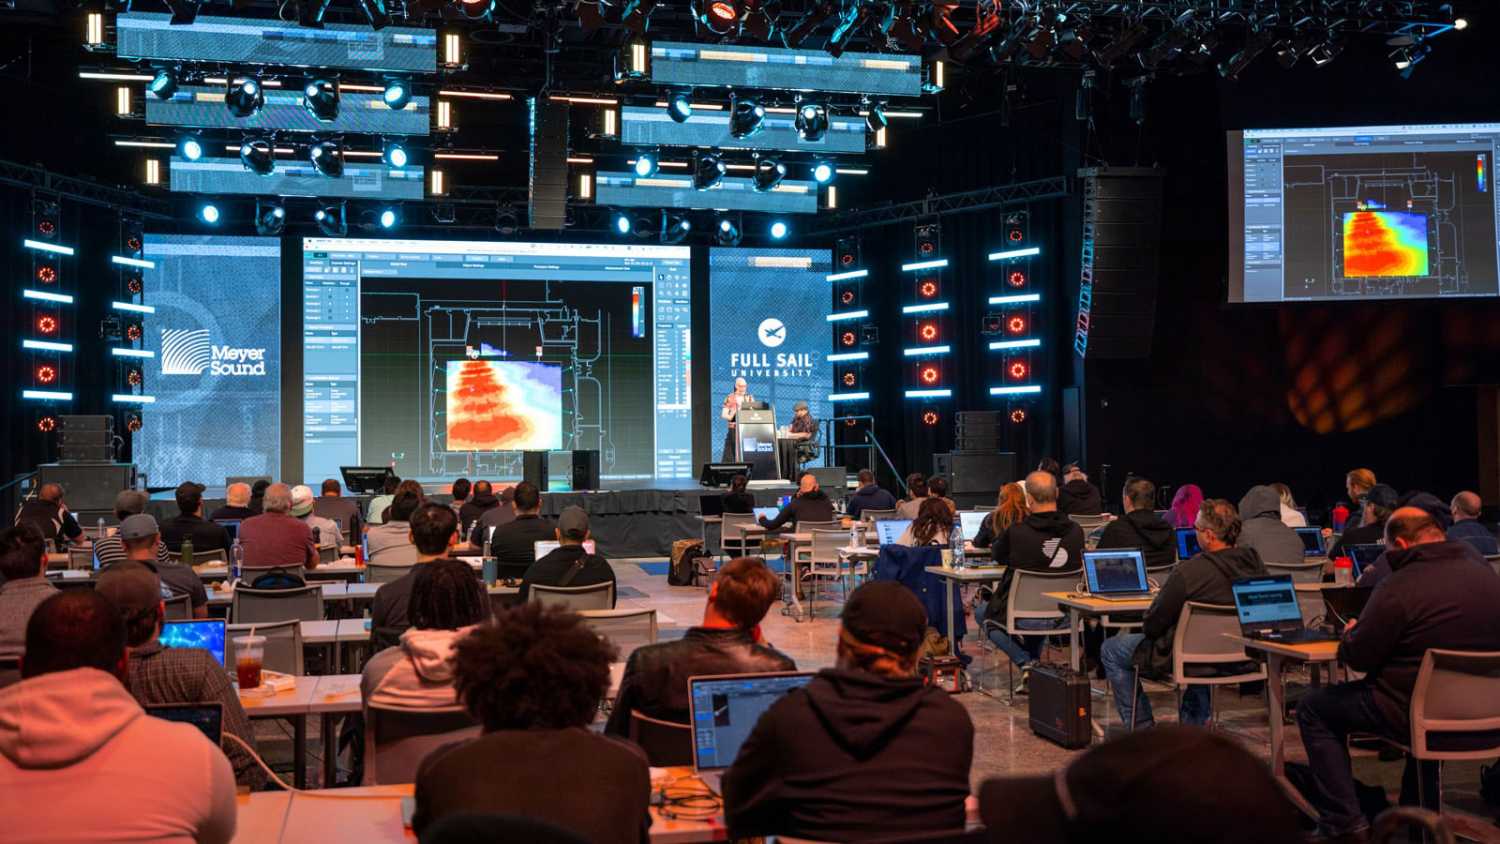 Full Sail University and the University of Derby hosted successful trainings at their facilities